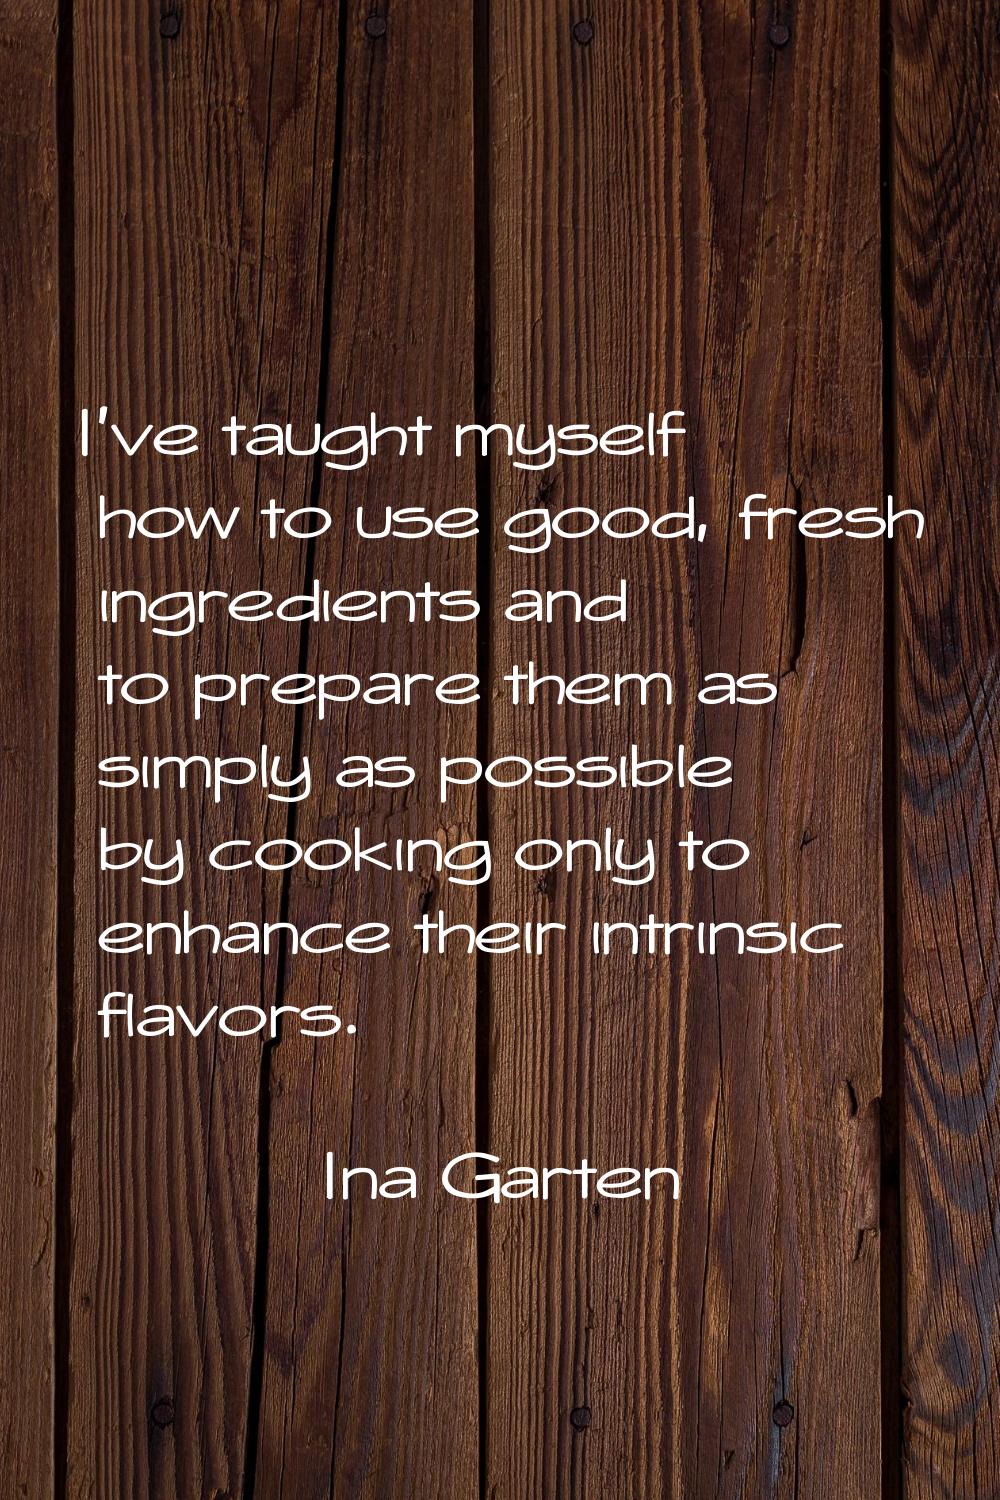 I've taught myself how to use good, fresh ingredients and to prepare them as simply as possible by 